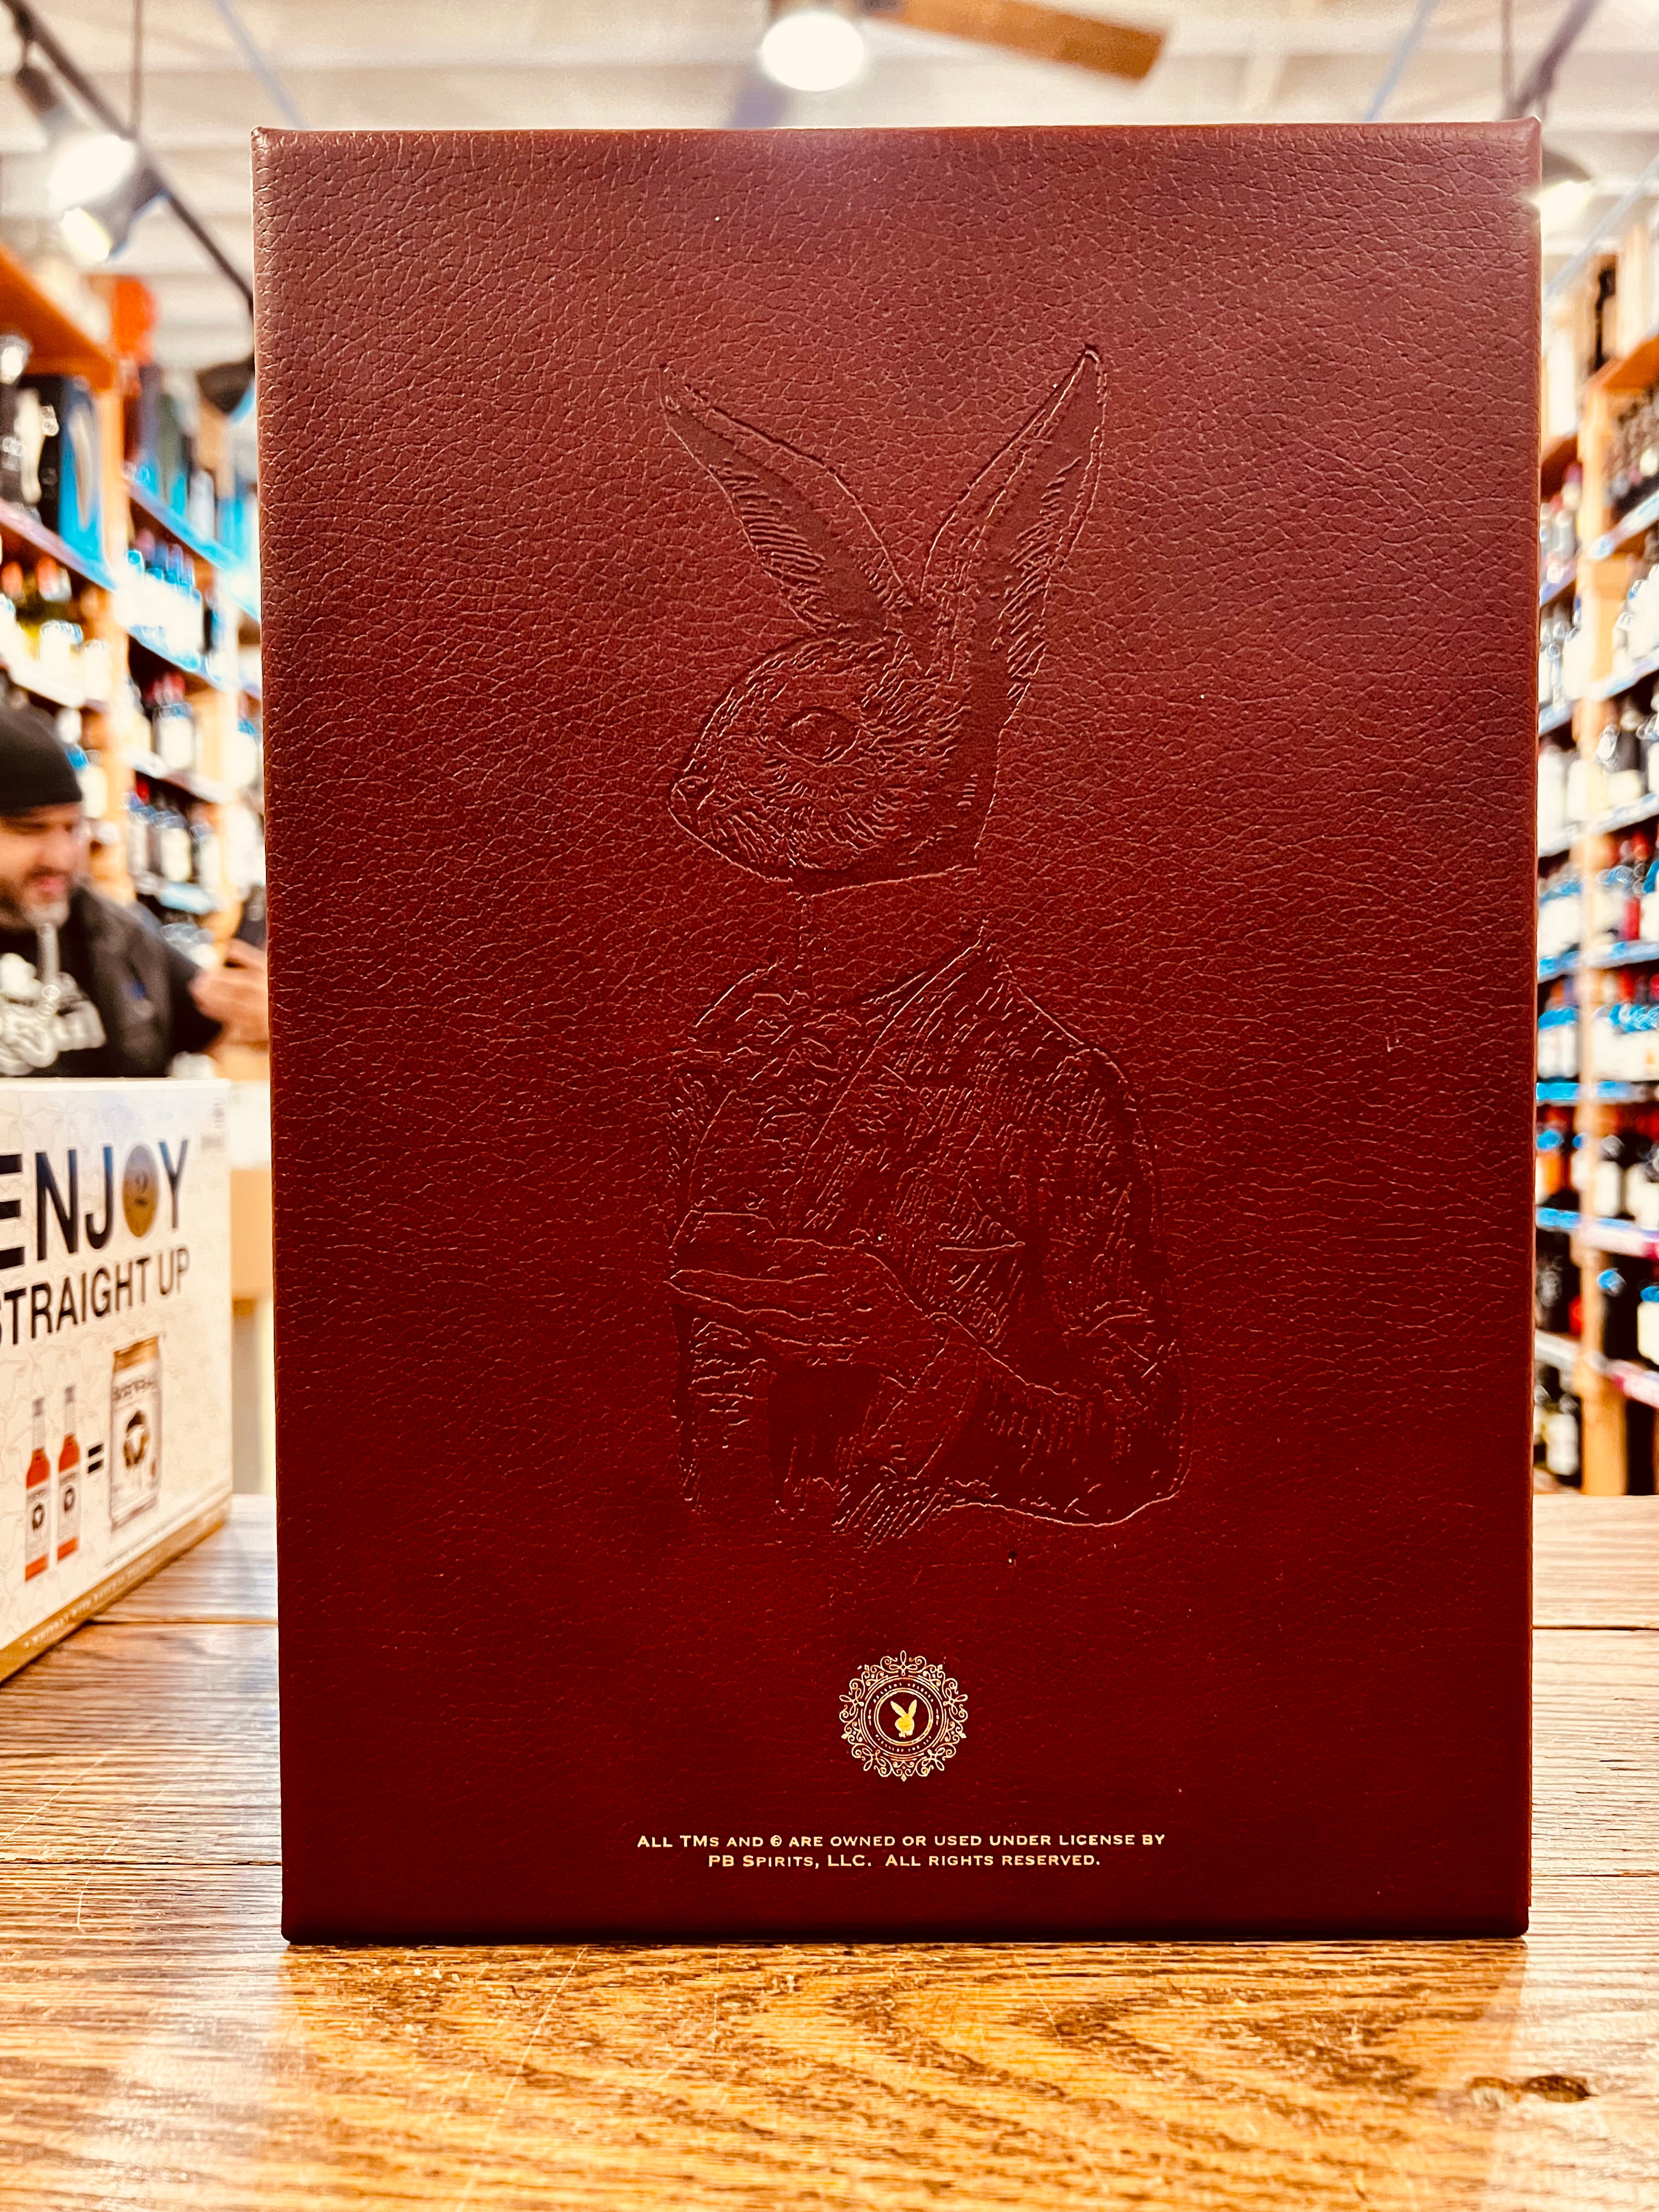 Rare Hare Cognac Lapine Aged 60 Years 750mL a dark red leather box with the image of a well dressed rabbit engraved on the front